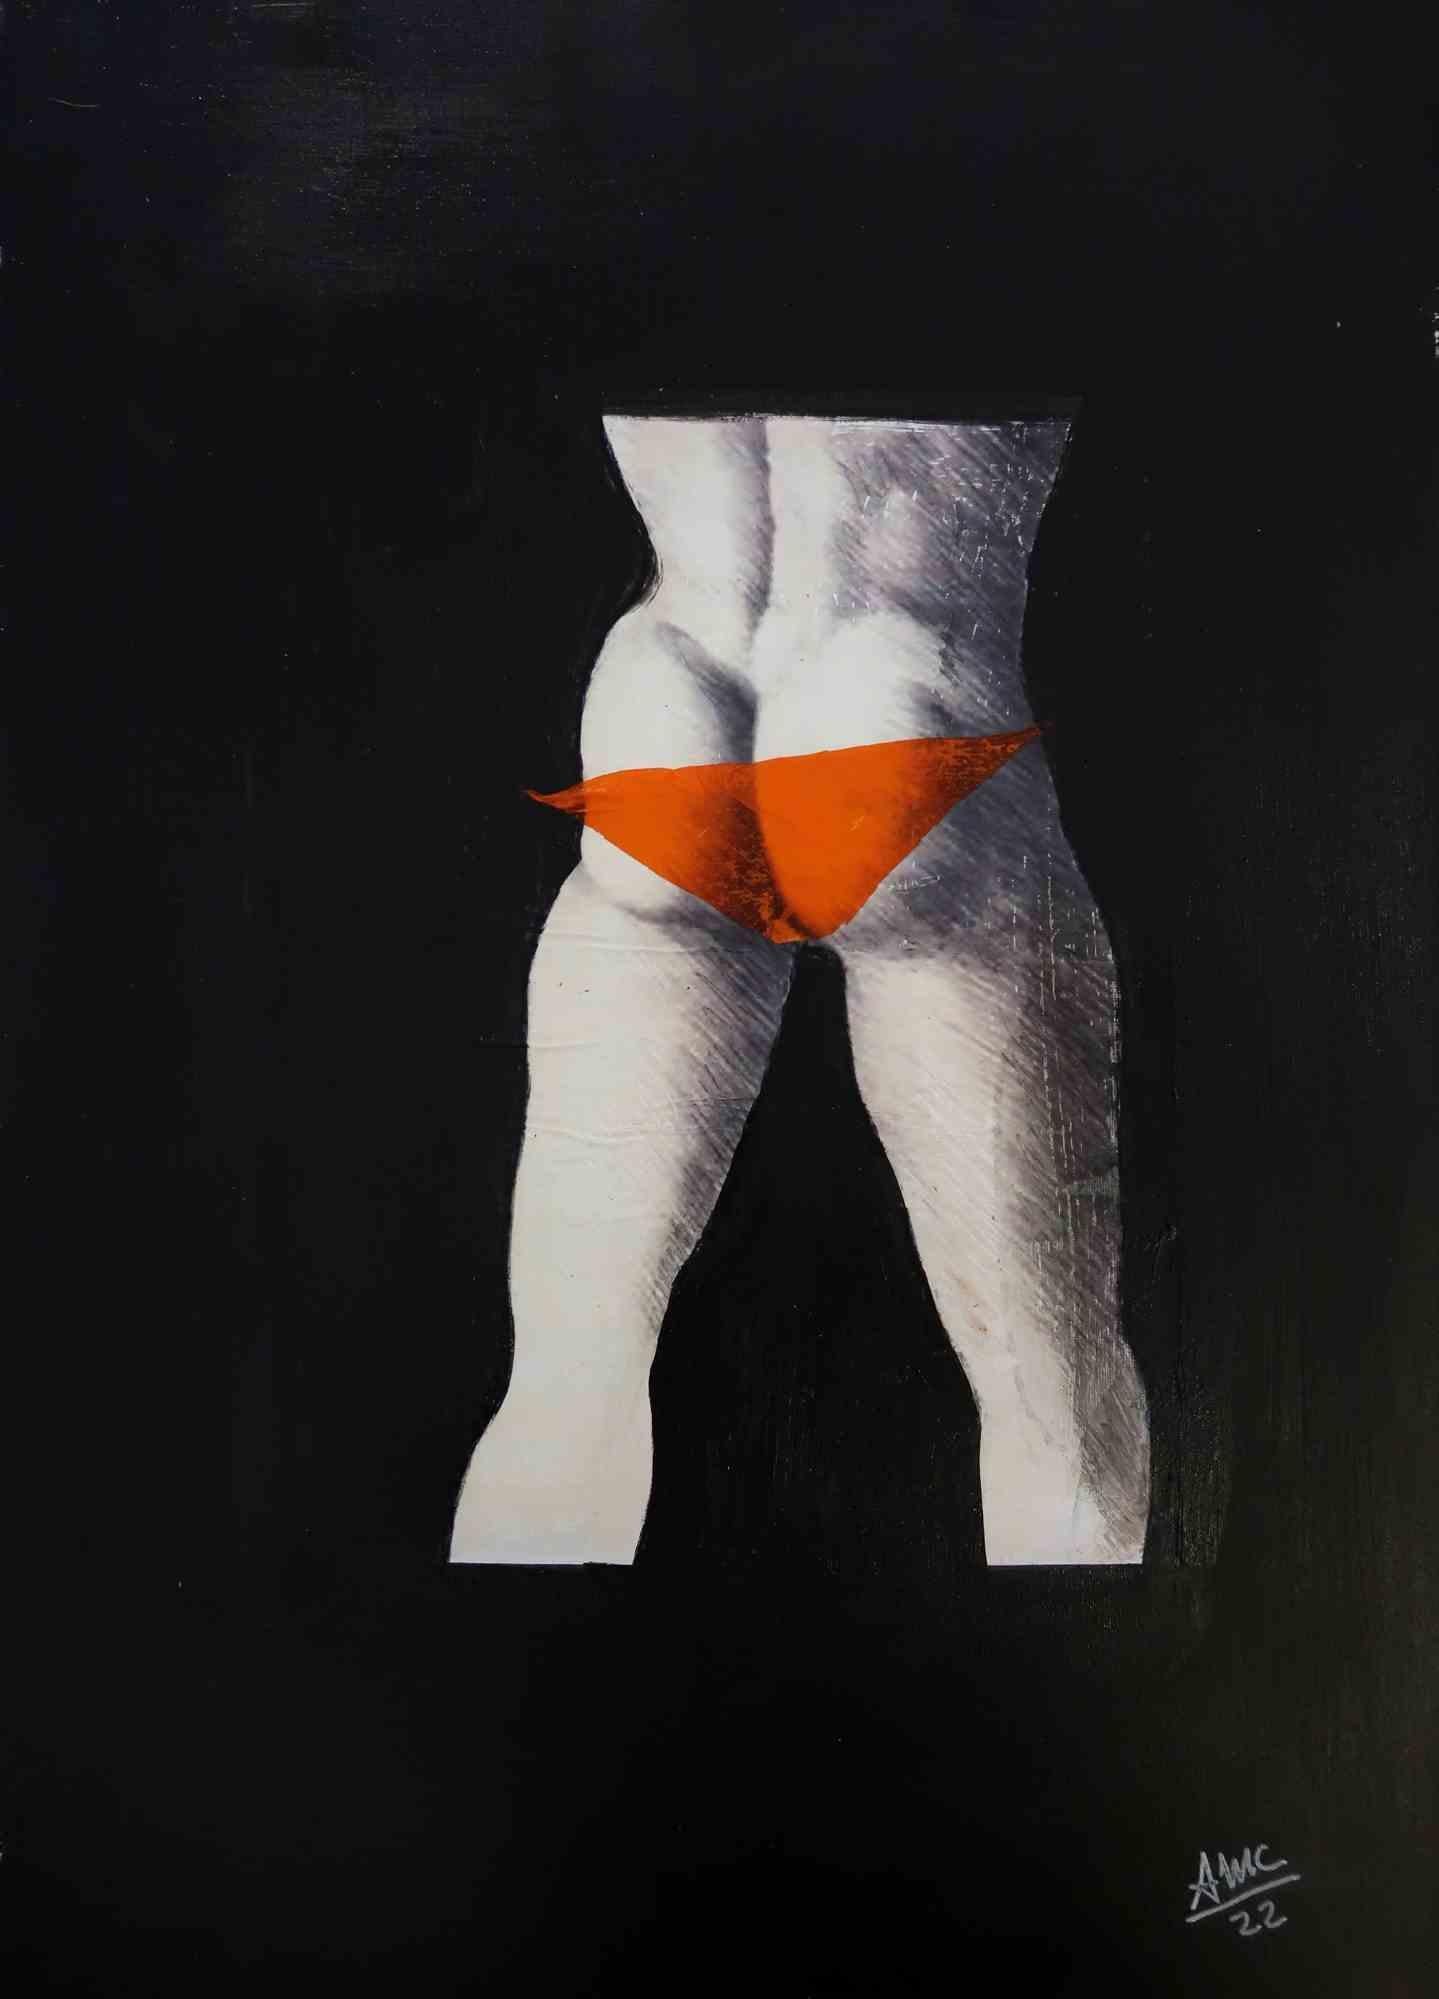 Destroy the Gender is a provocative acrylic painting and collage realized by the Italian artist Anna Maria Caboni.

The collage depicts a statuary male nude covered by orange underwear. The painting highlights how unresponsive we are in front of a